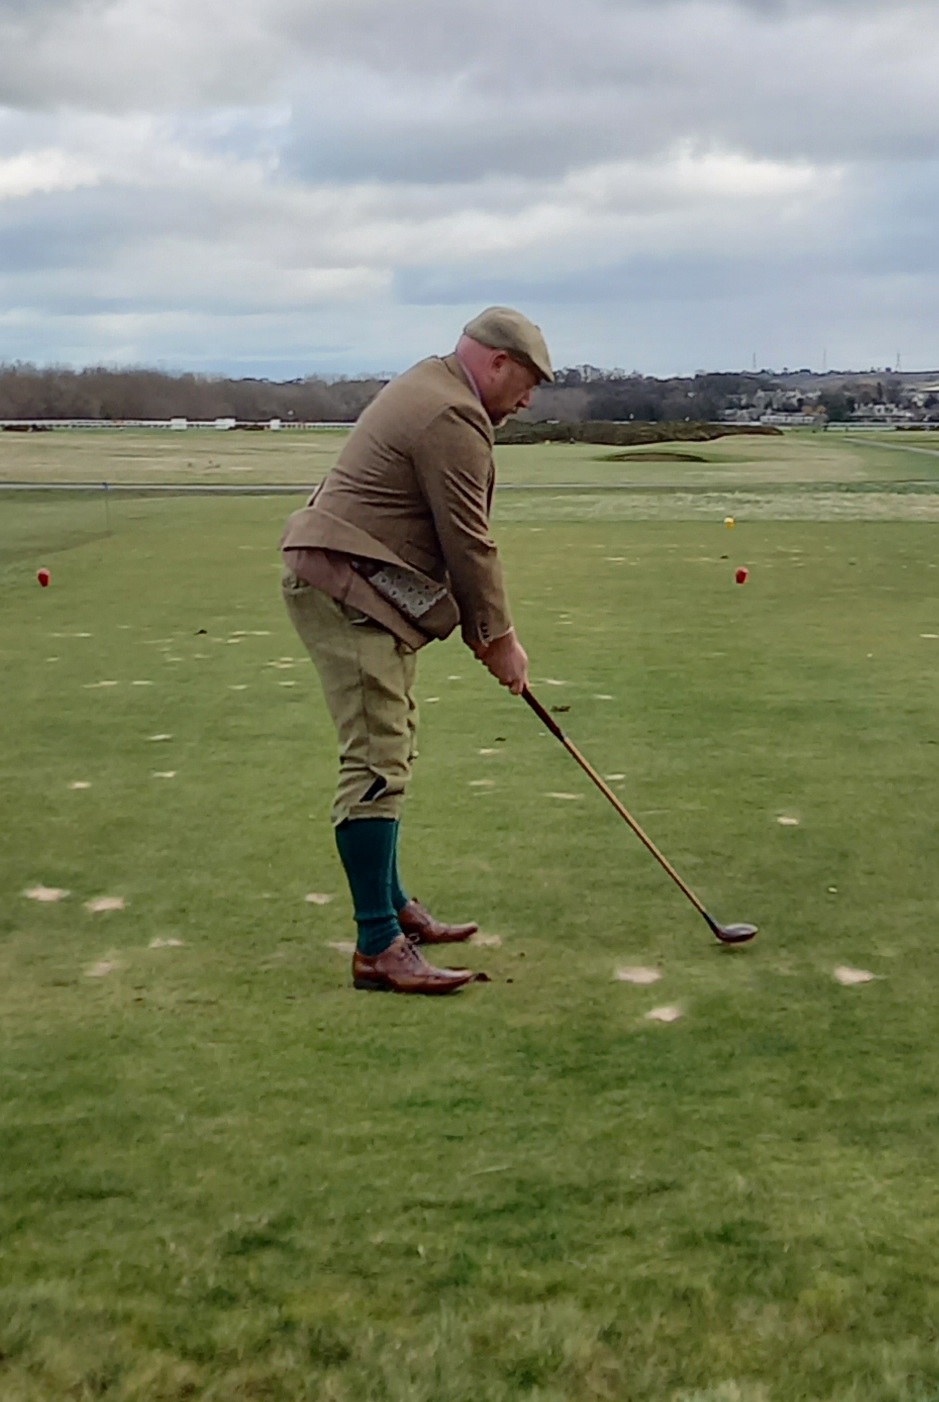 Back to the Future at Musselburgh Old Course – What a Bonnie looking golfer